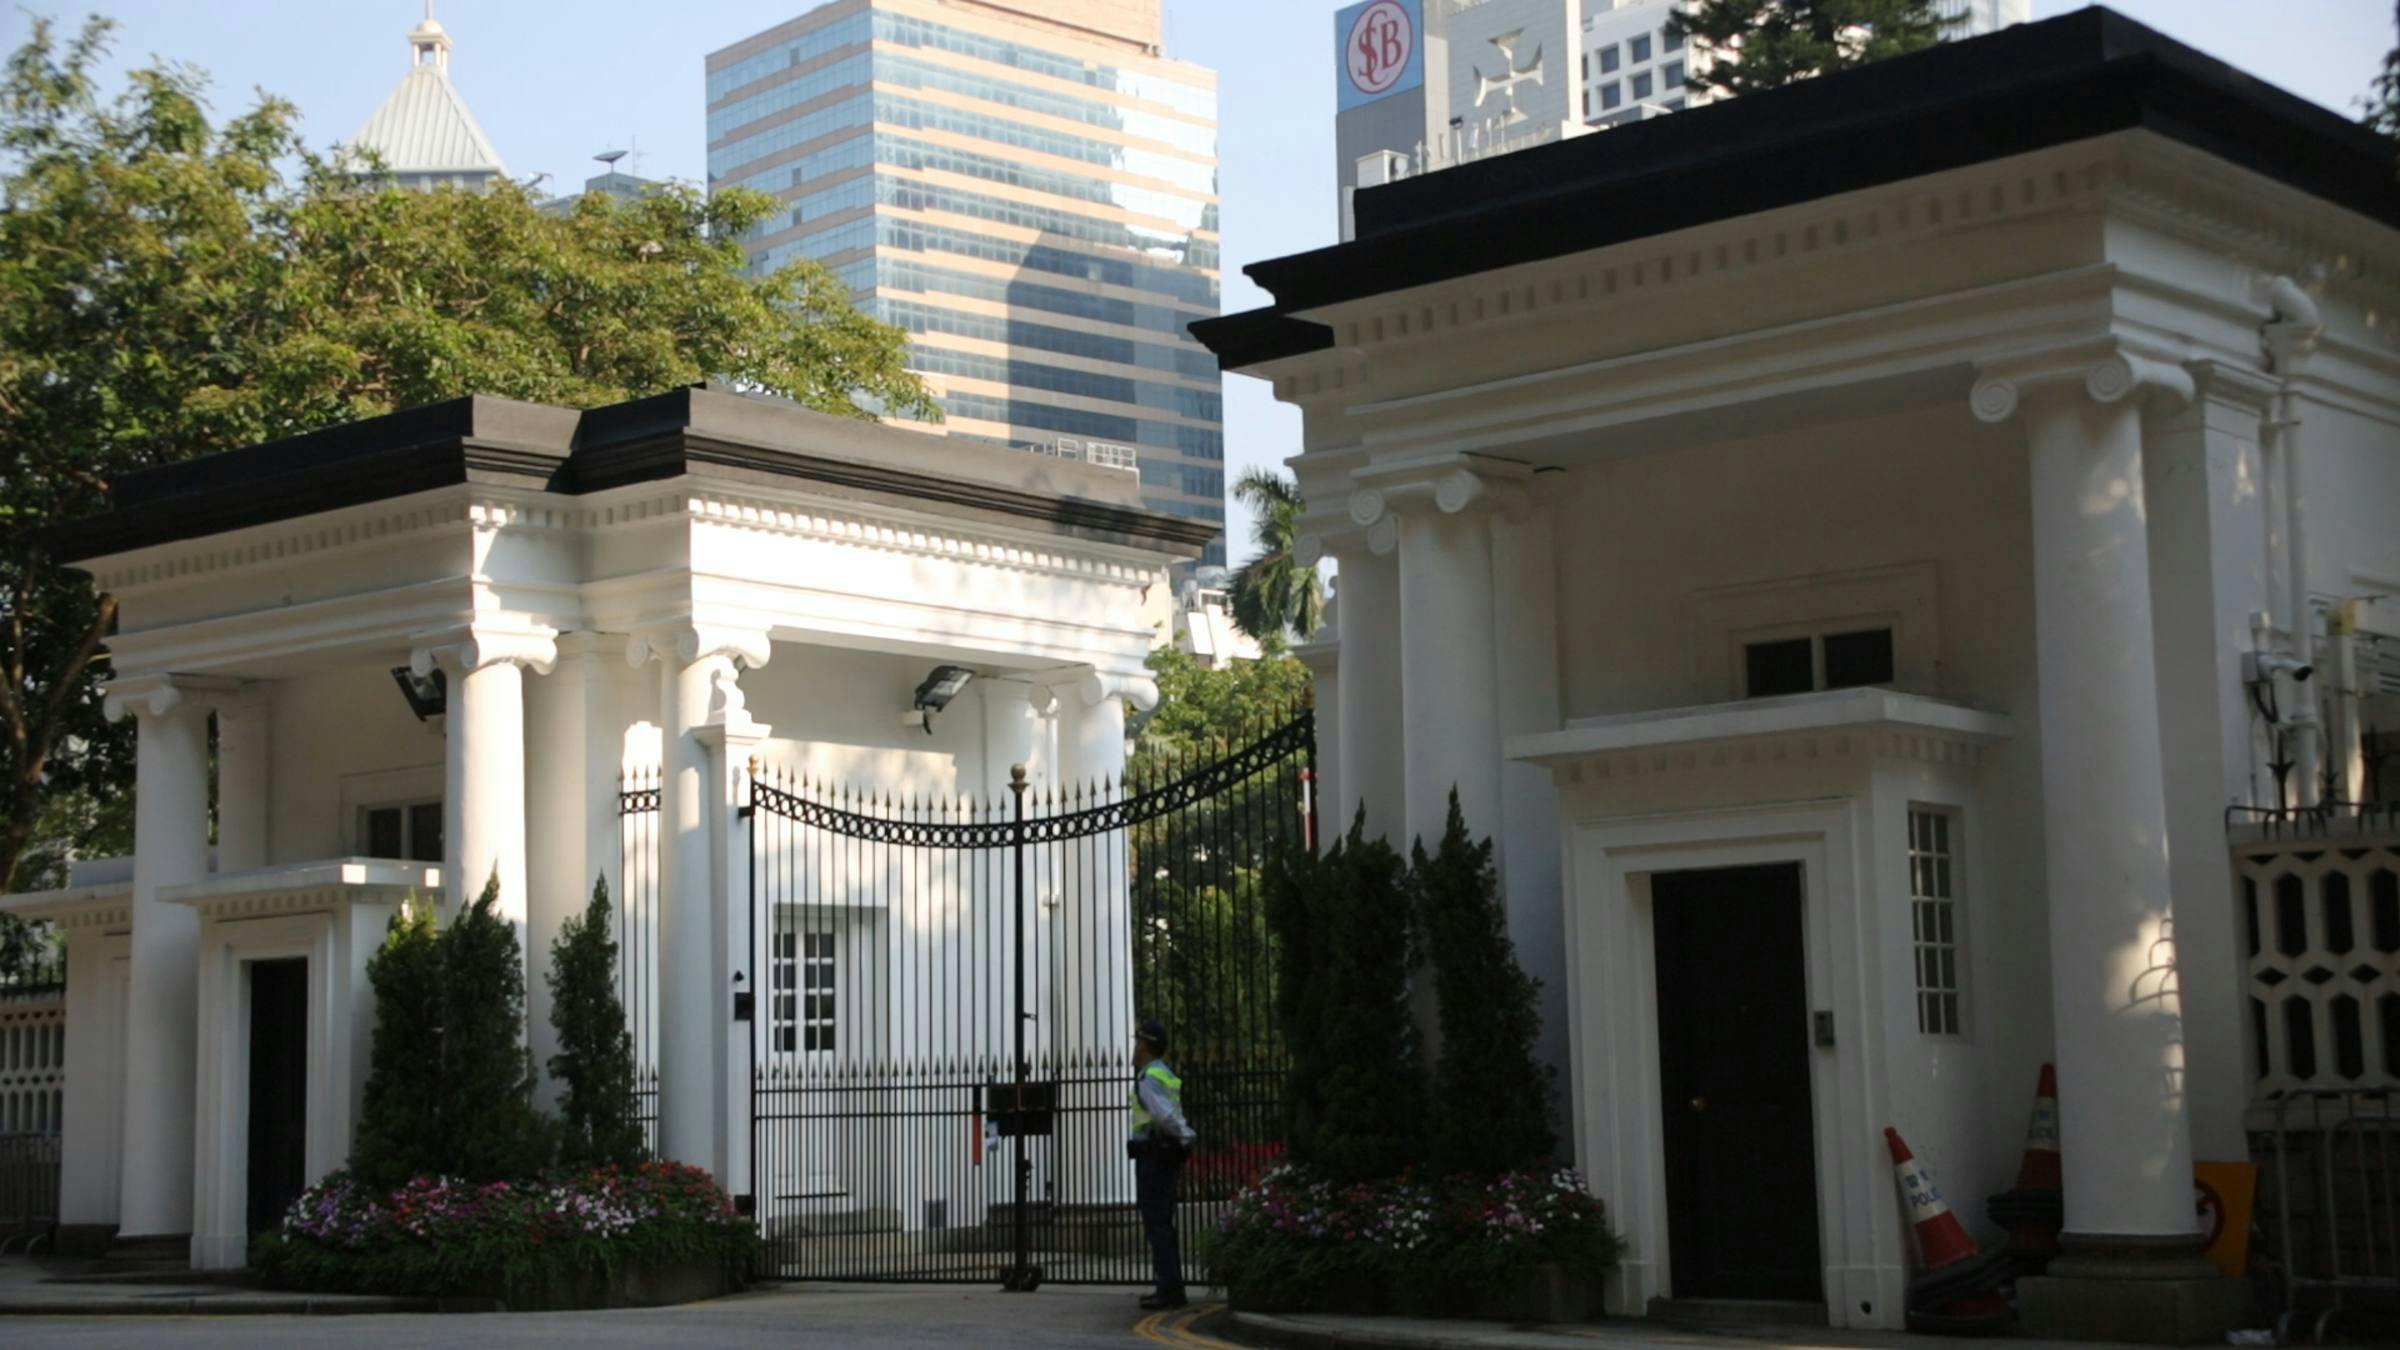 image of two official looking white buildings with columns on every side, with a tall gate in between them. There is a security guard standing next to the gate.